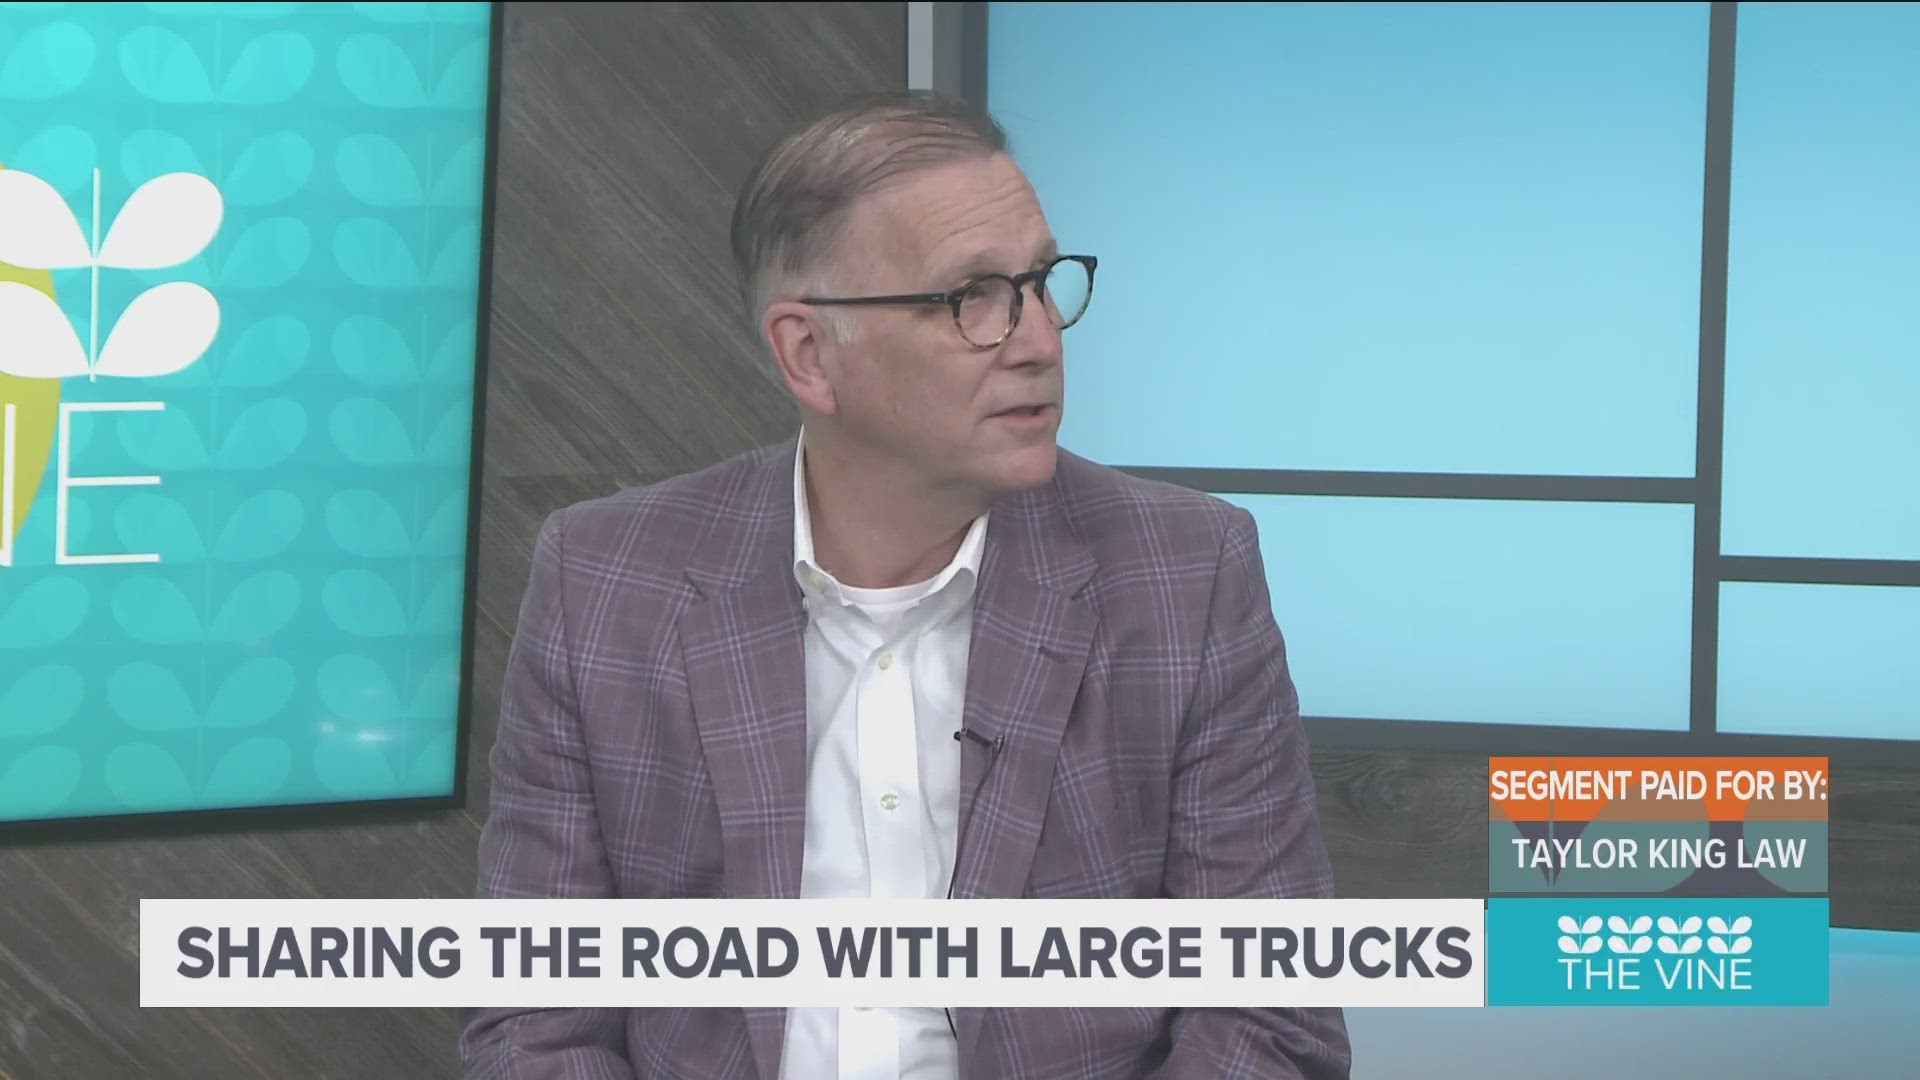 Taylor King tells us how to be safe when sharing the roads with large trucks.